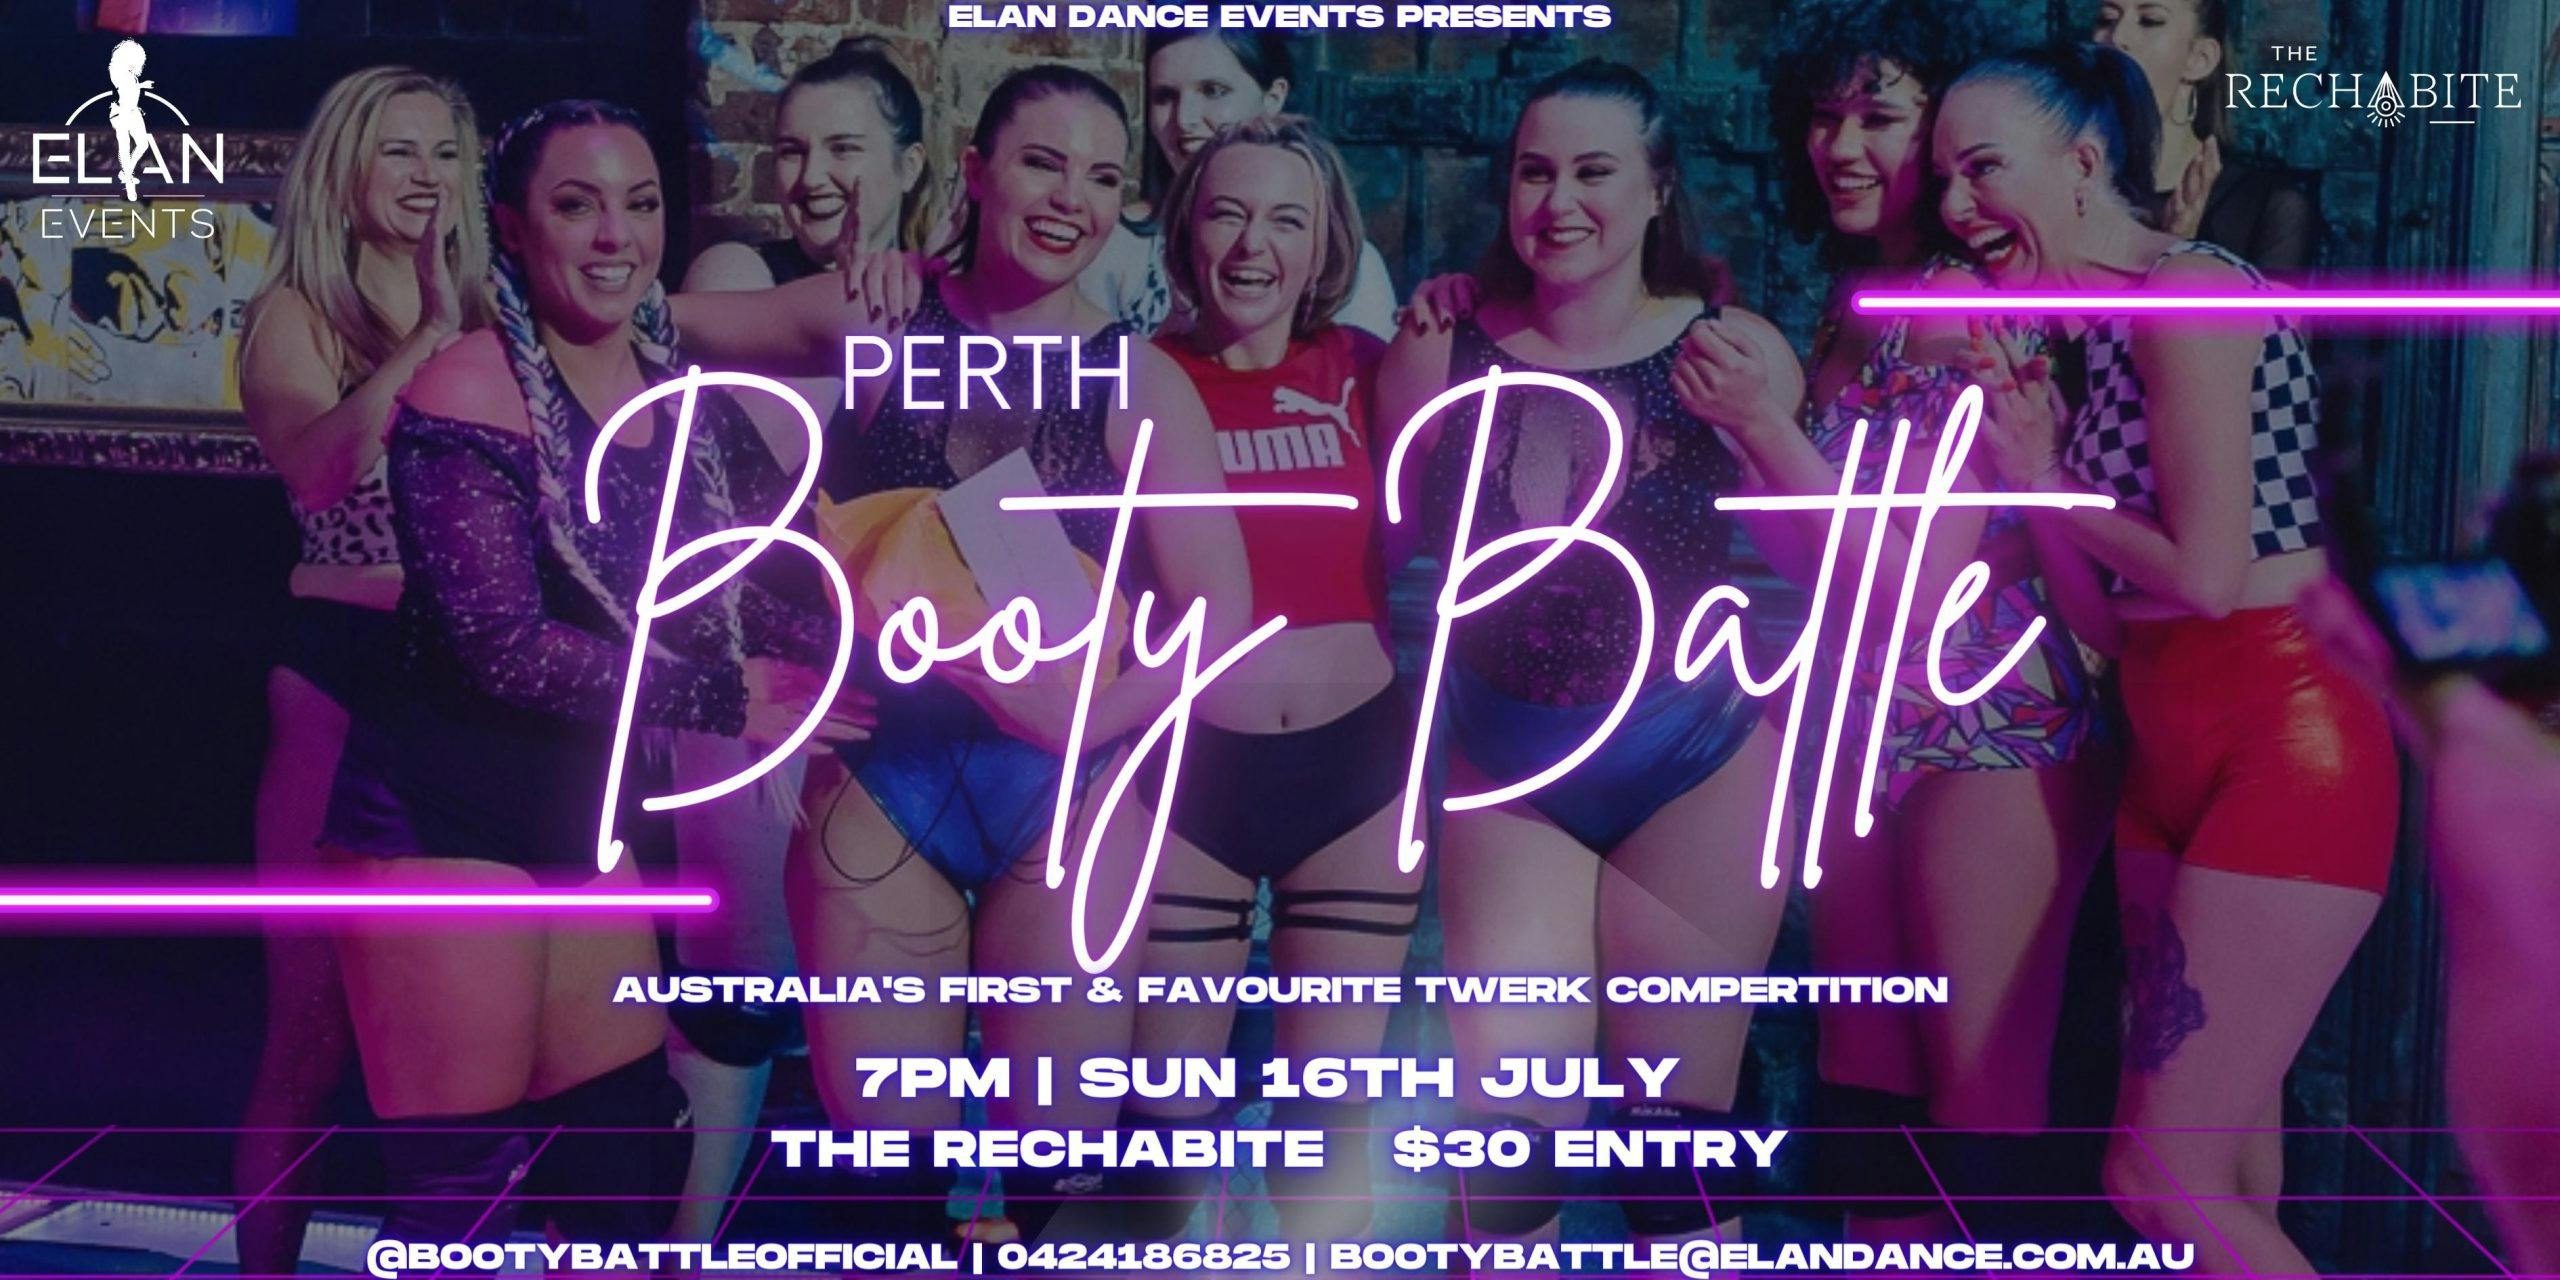 Perth Booty Battle Twerk Competition Perth is OK!